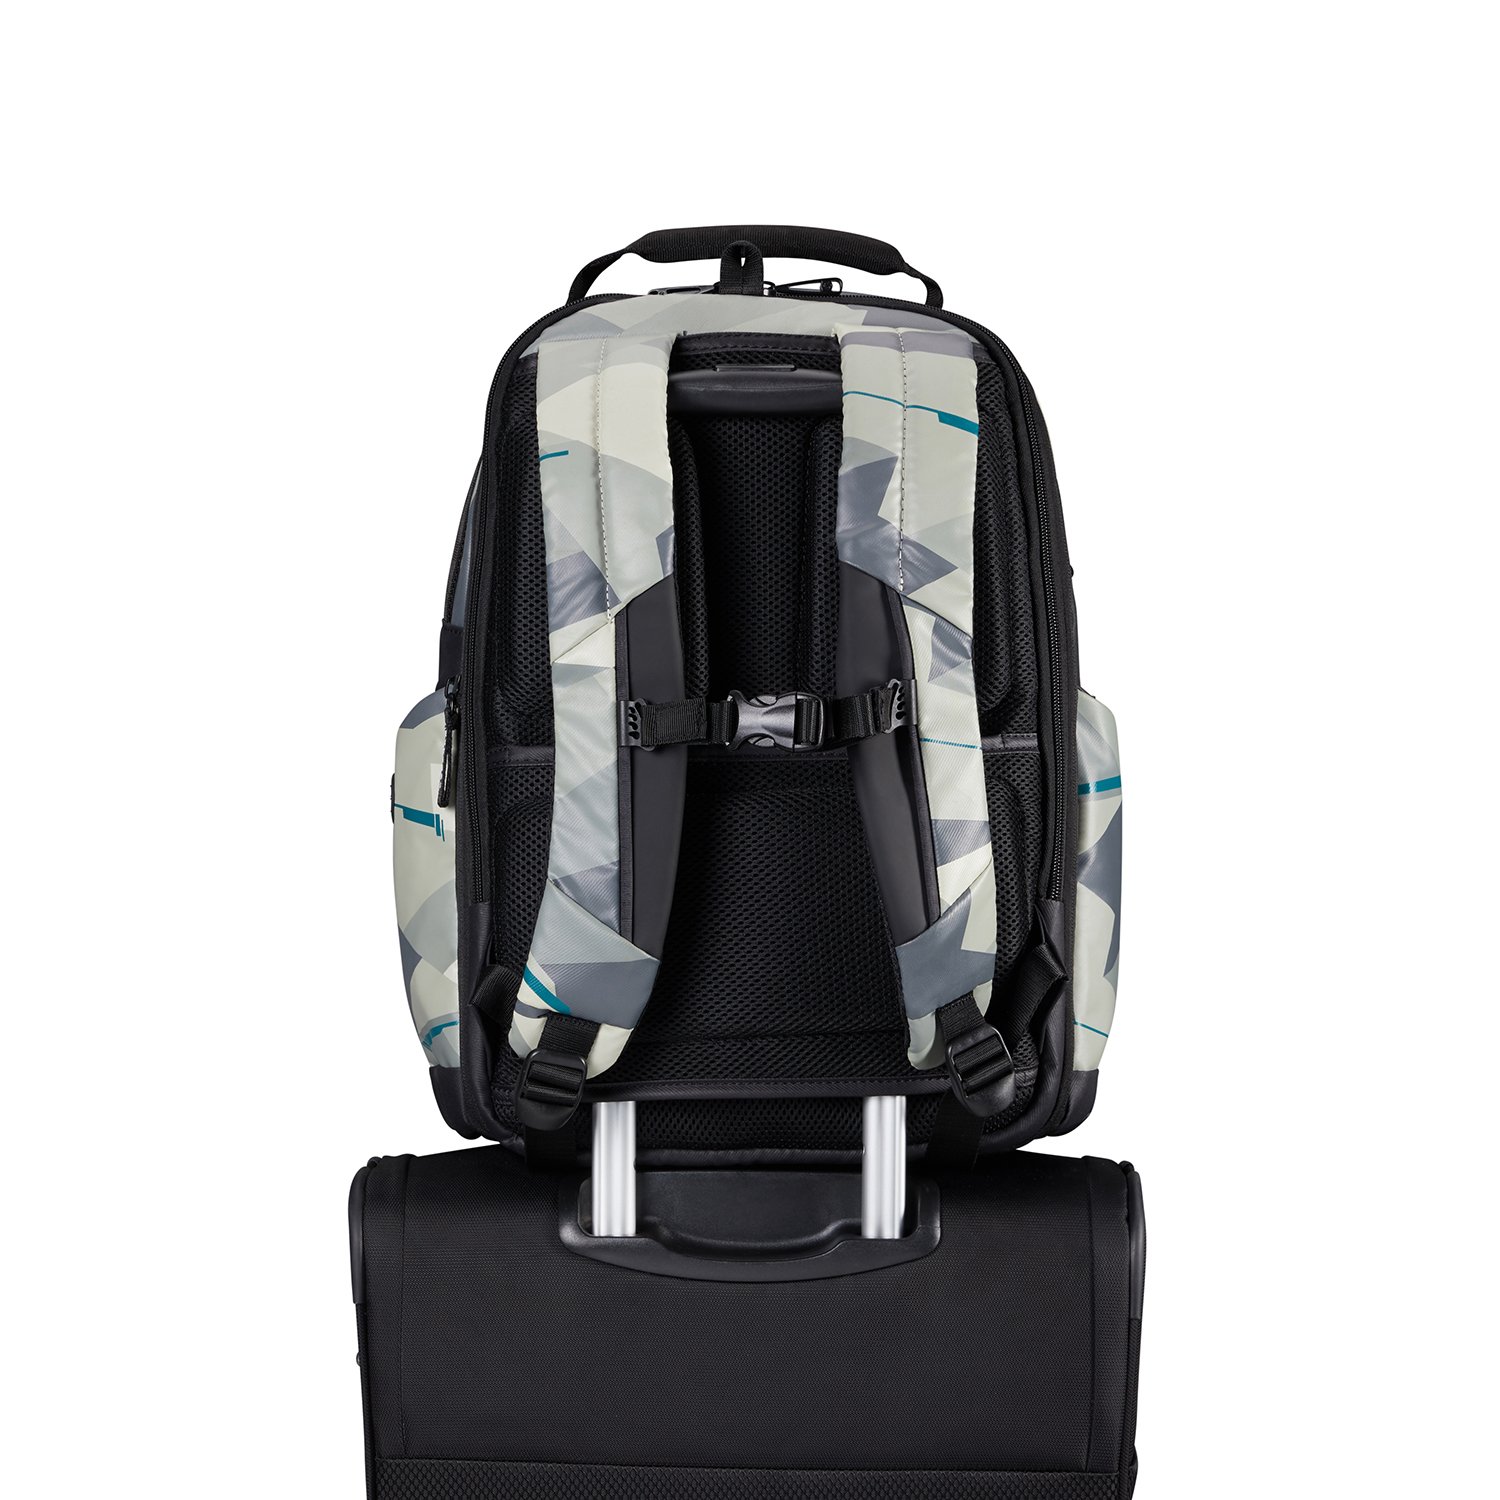 CITYVIBE 2.0-LAPT BACKPACK 15.6" EXP SCM7-006-SF000*48